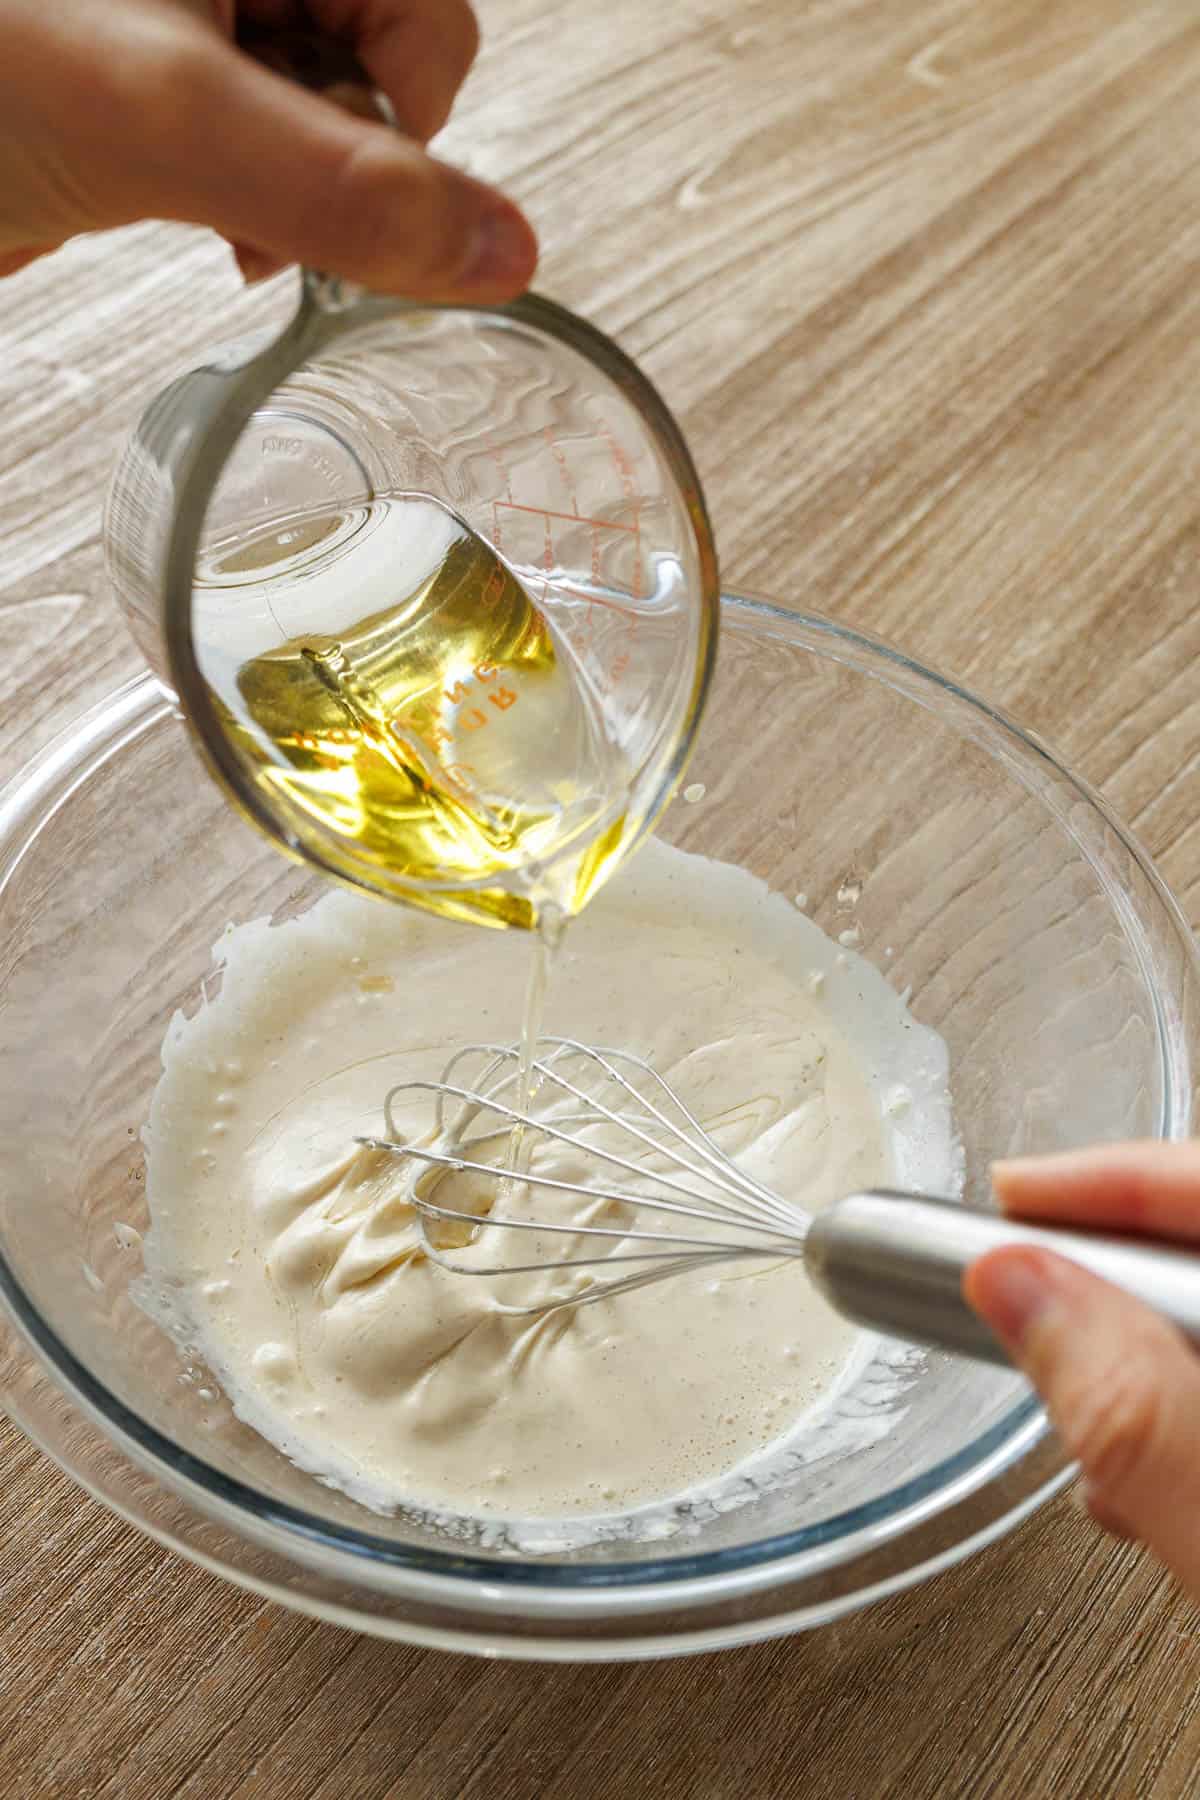 Lightly drizzle oil into the Caesar salad dressing and whisk together